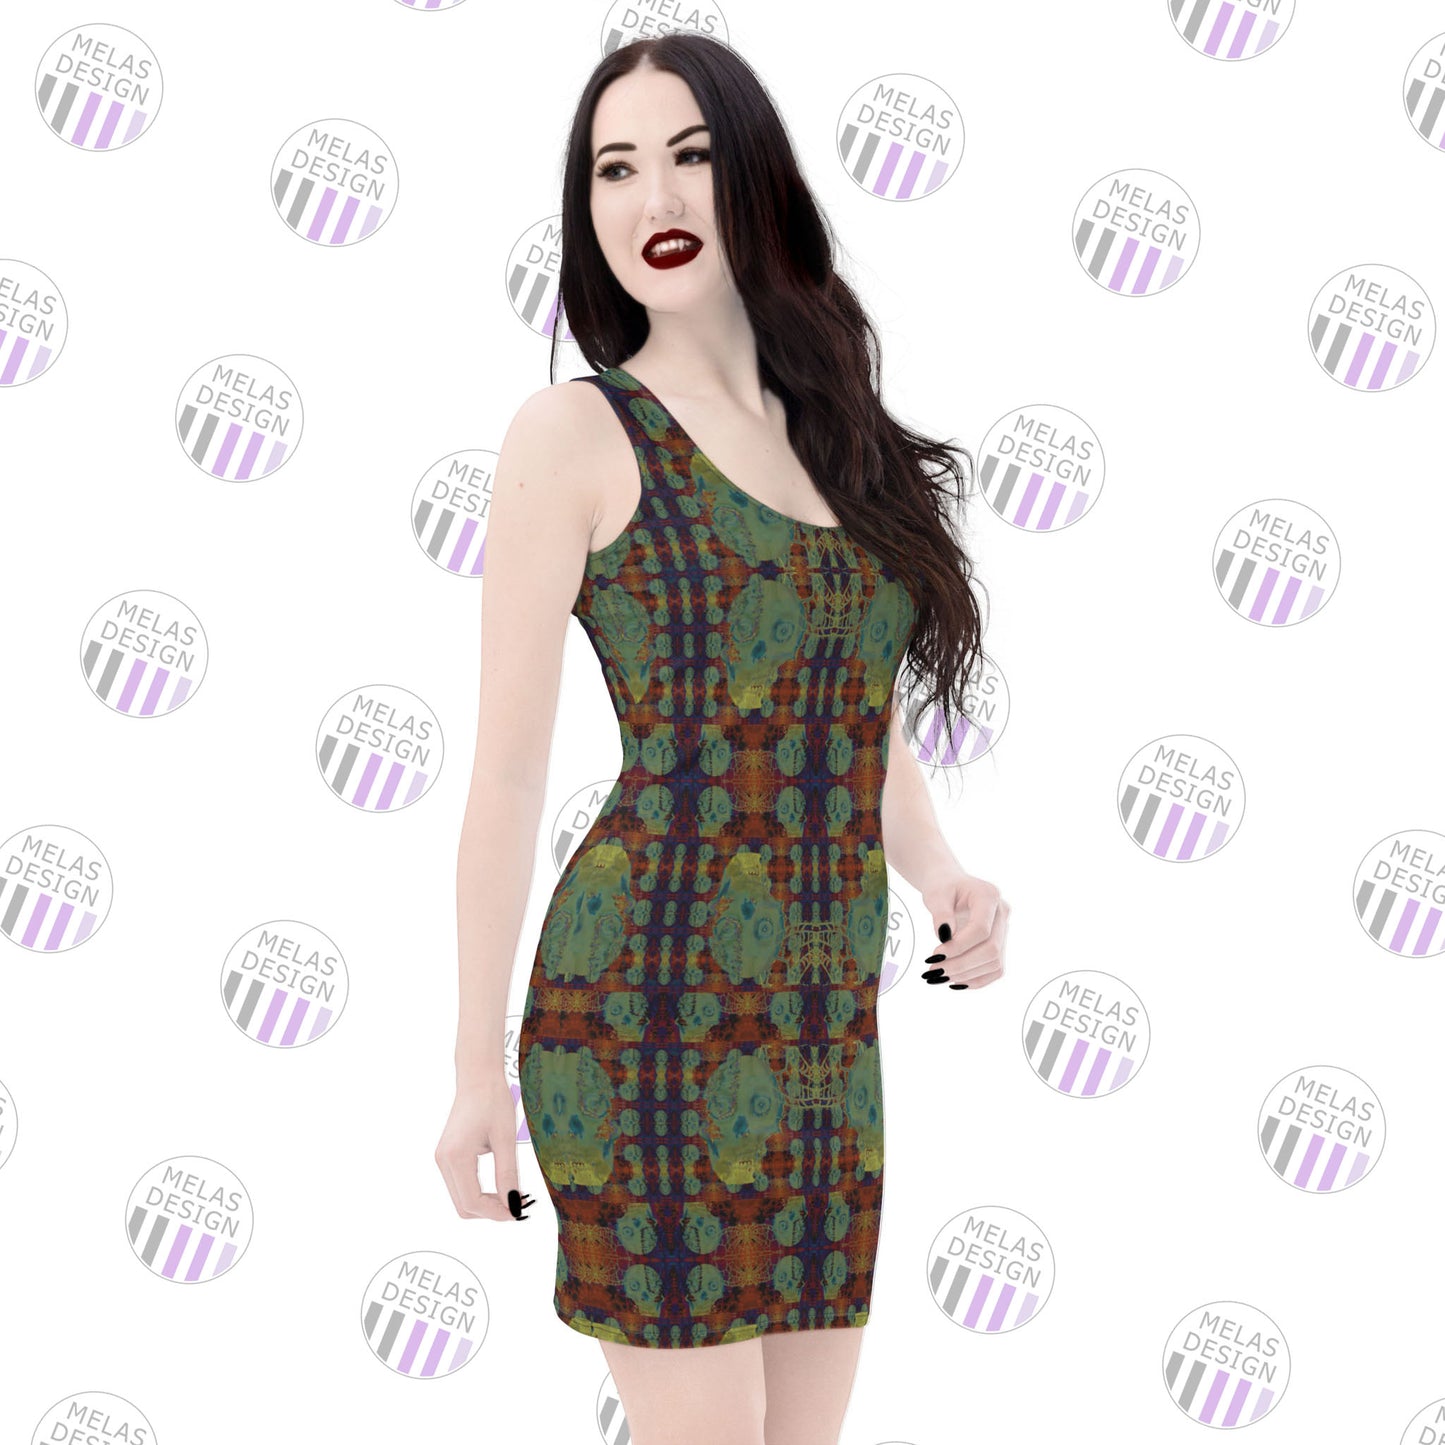 Glowing Skulls Bodycon Dress; gothic; goth; horror; skull pattern; dress; mini; short; sleeveless; Melasdesign; witchy gothic clothes collection